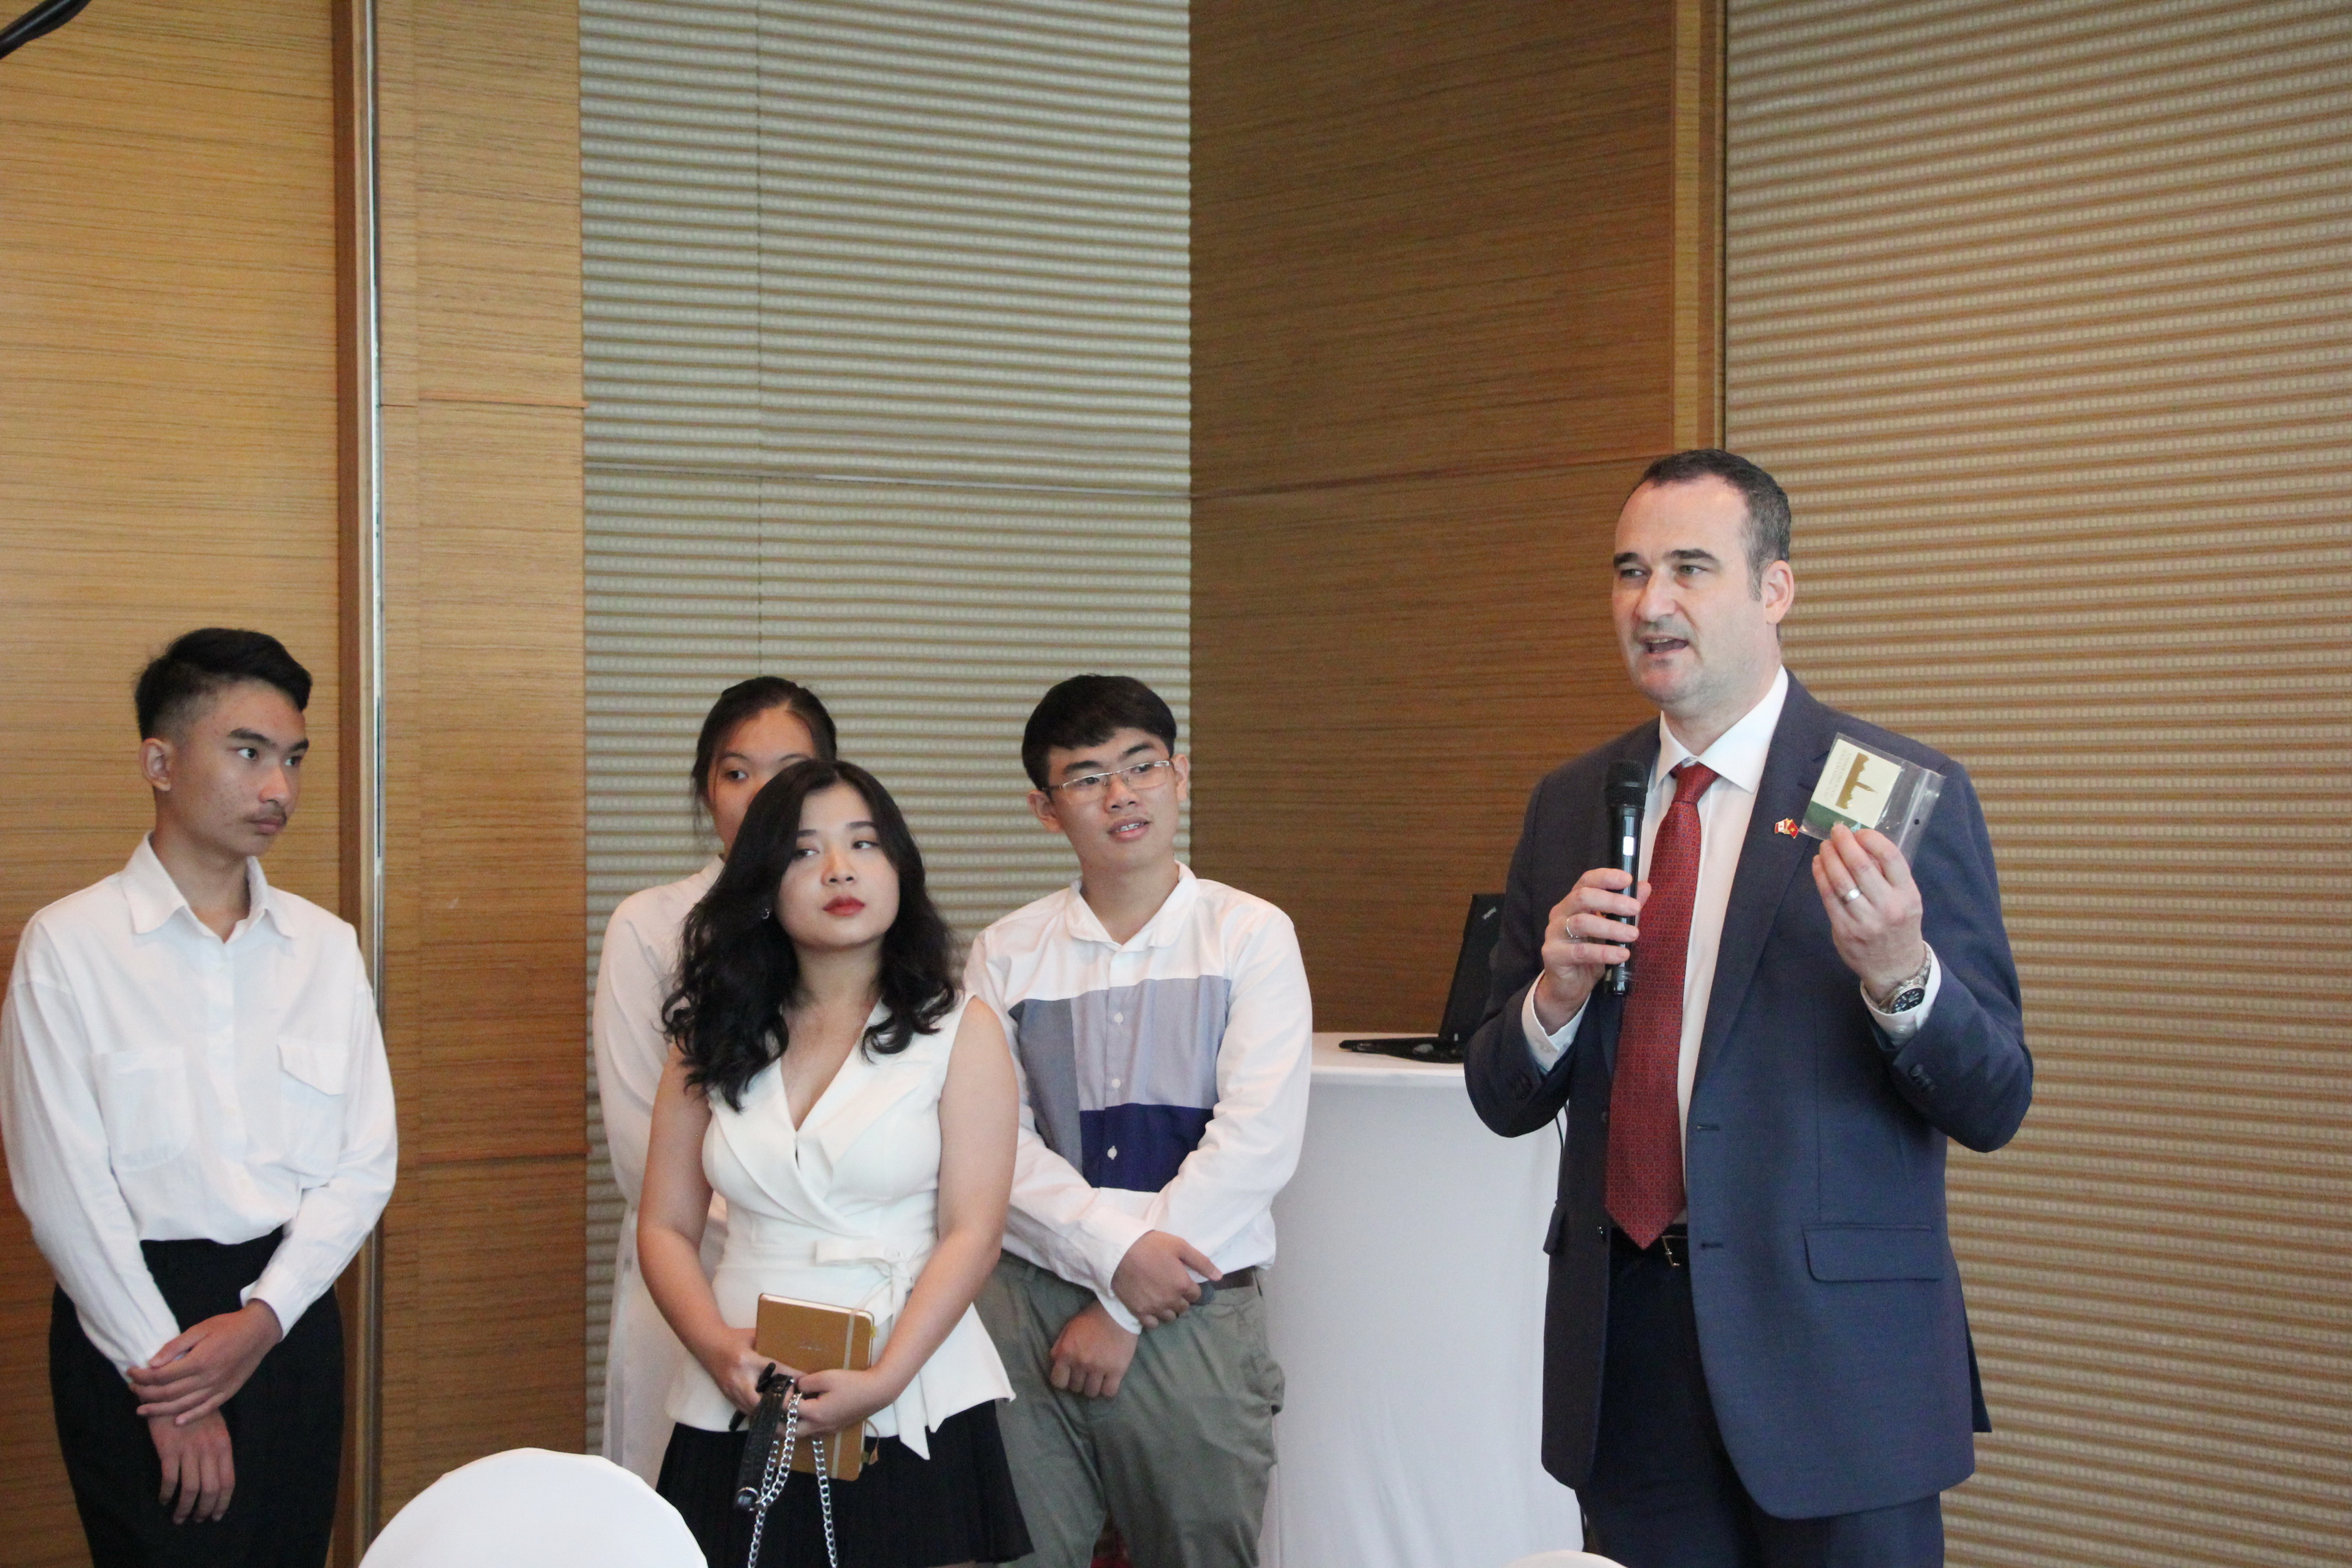 Canadian Consul General Kyle Nunas handles the 'Consul General for a Day' contest's finalists souvenirs made from the original cooper which covered the roofs of Canada's Parliament Buildings from 1918 to 1996 at the at the luncheon on February 19, 2020 in Ho Chi Minh City. Photo: Dong Nguyen/ Tuoi Tre News